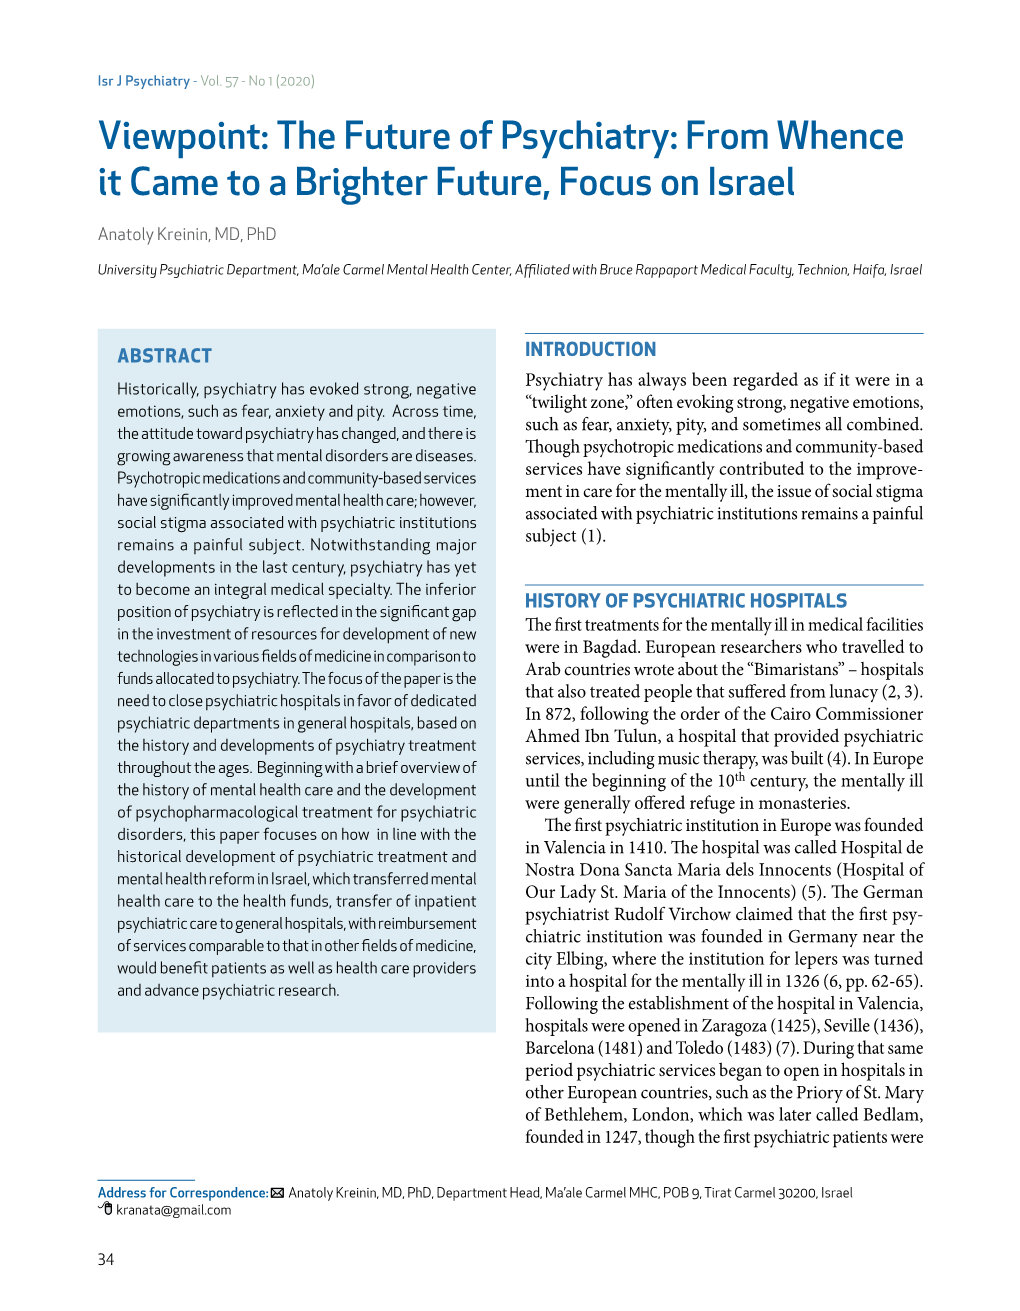 Viewpoint: the Future of Psychiatry: from Whence It Came to a Brighter Future, Focus on Israel